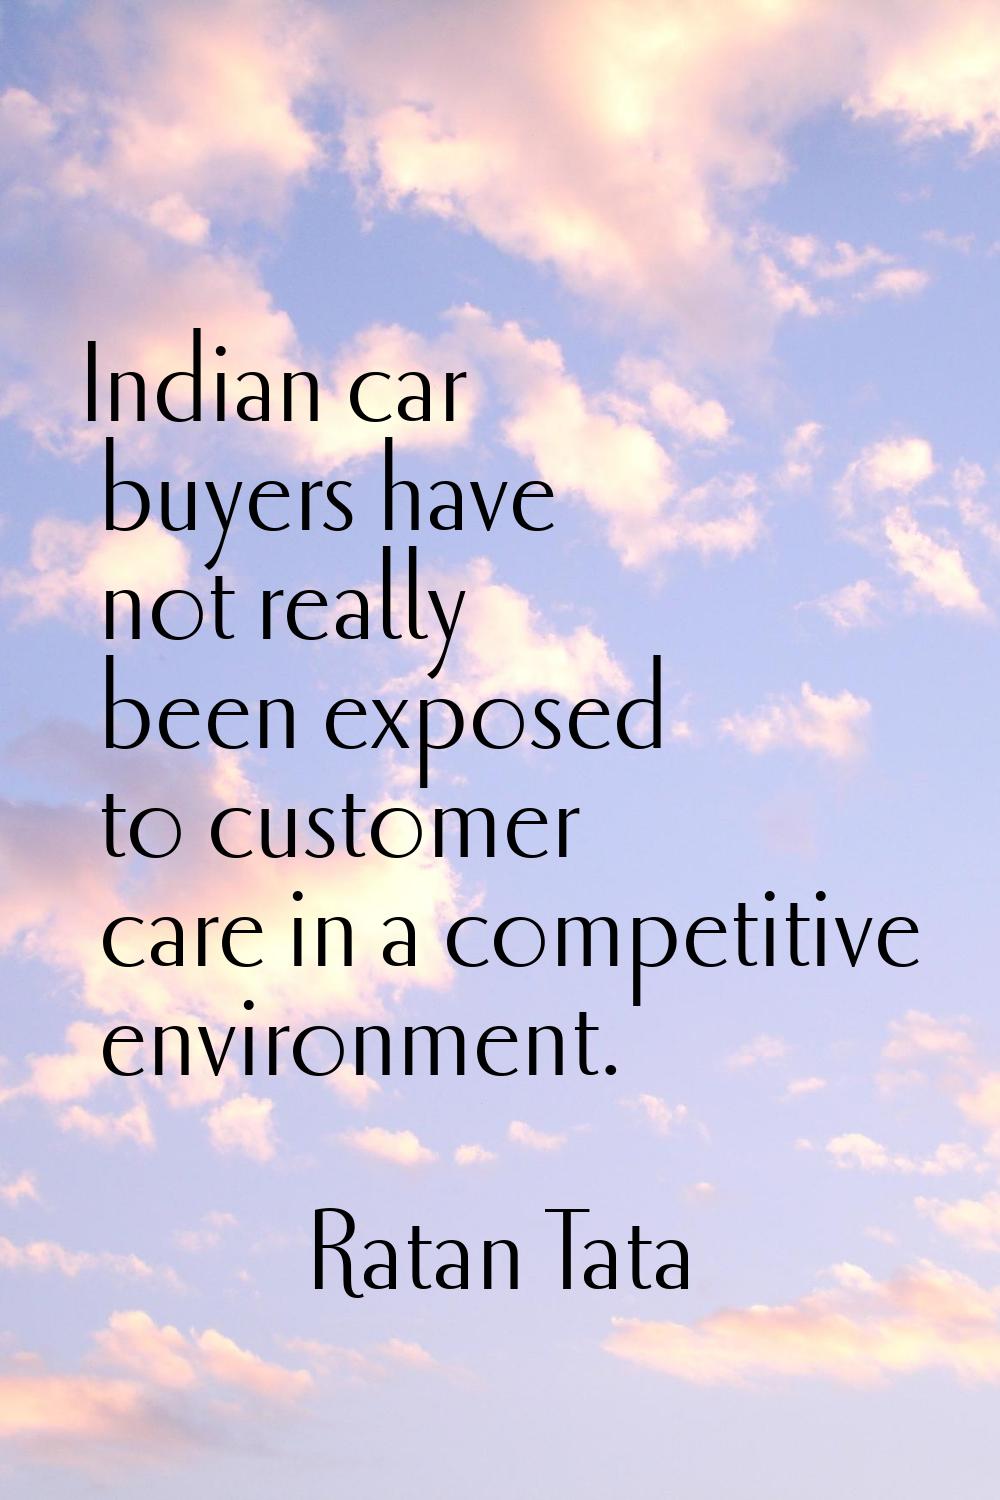 Indian car buyers have not really been exposed to customer care in a competitive environment.